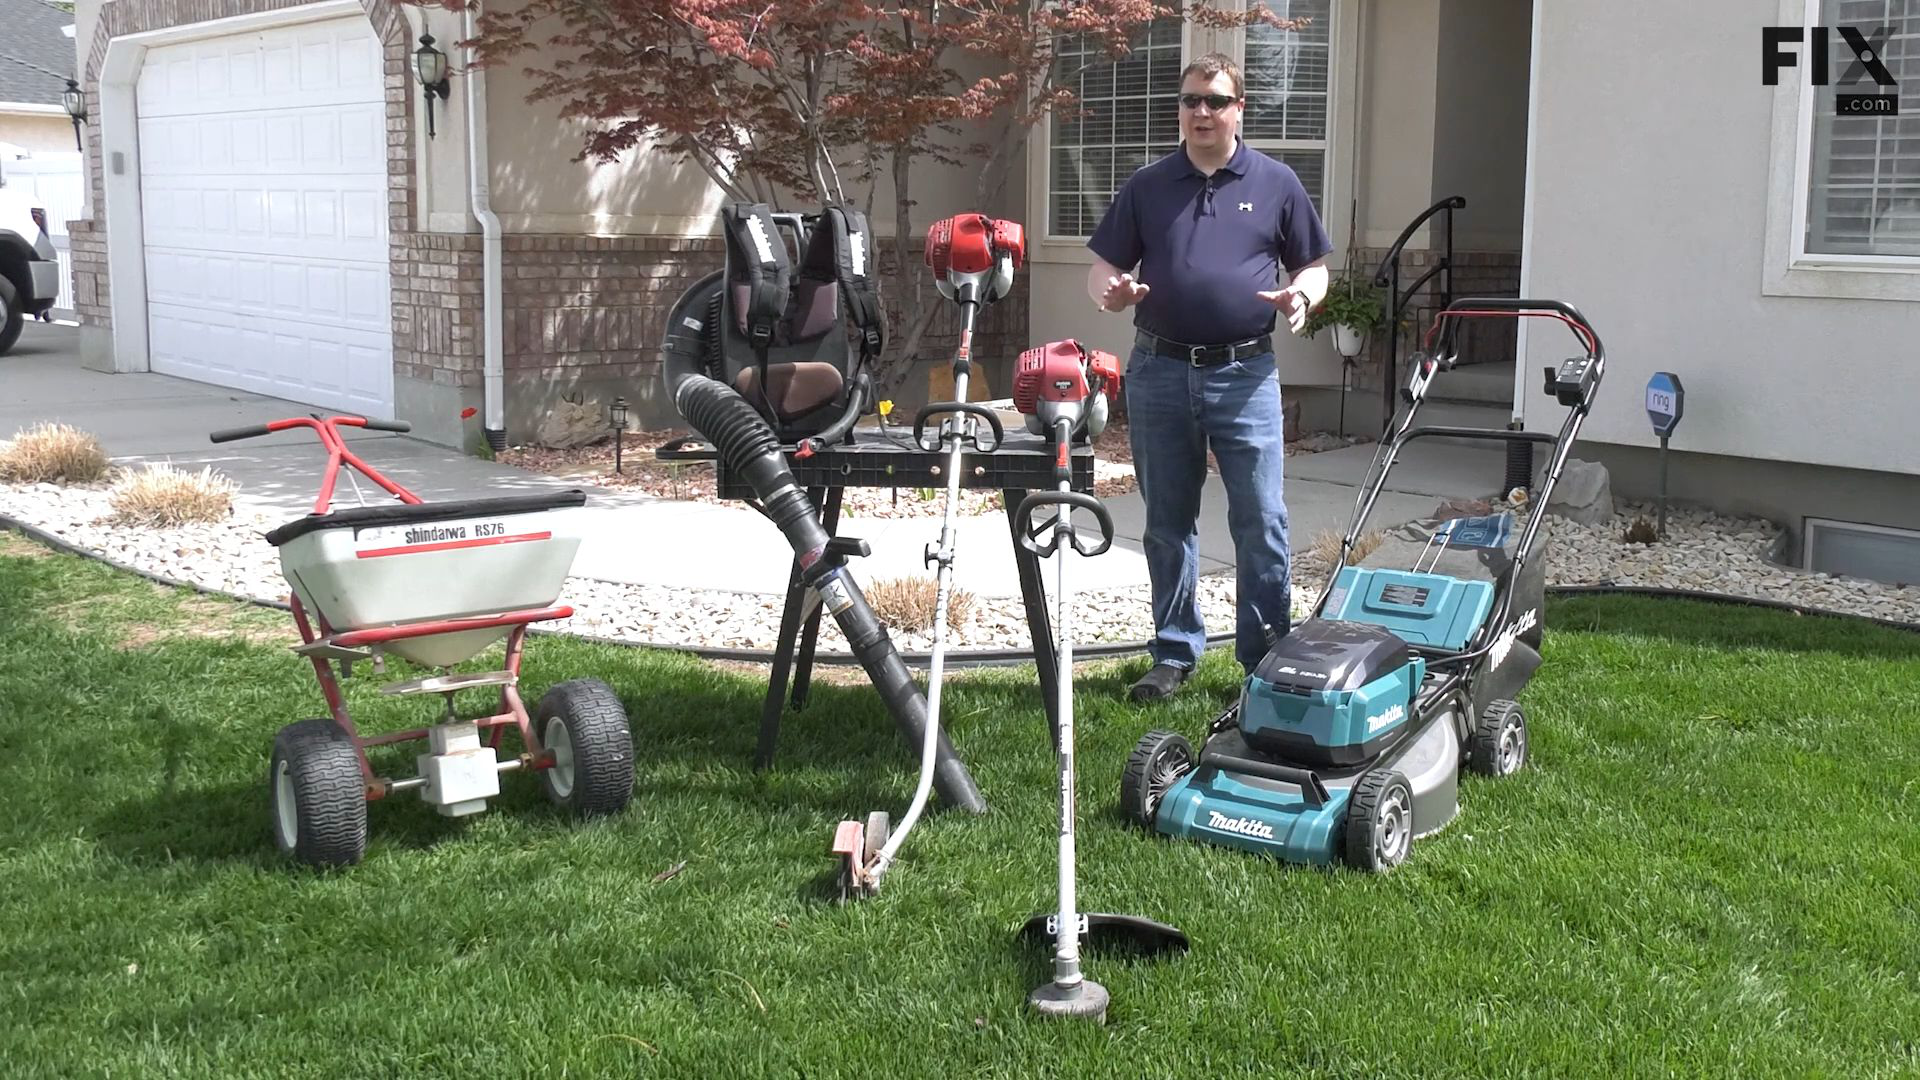 Repair technician standing on a front lawn of a home amongst a lawn mower, edger, trimmer, leaf blower, and fertilizer spreader